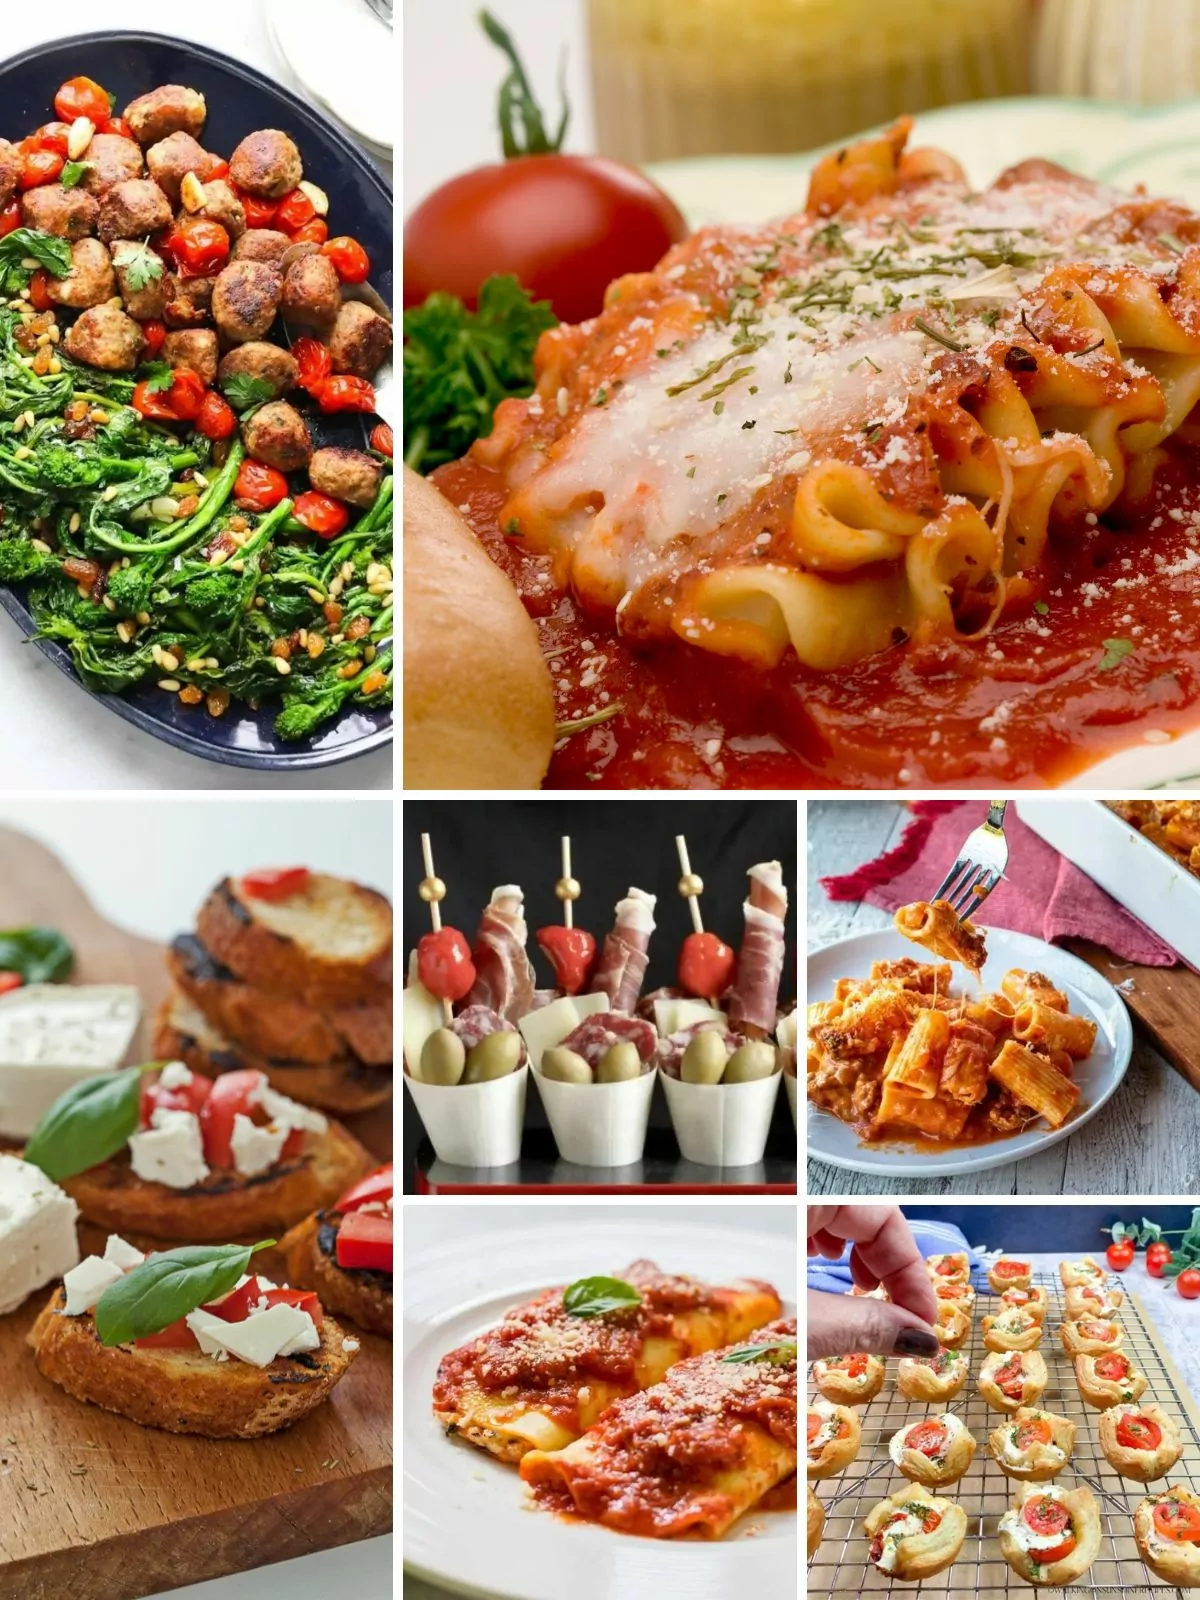 Recipes for Easter that are Italian themed.